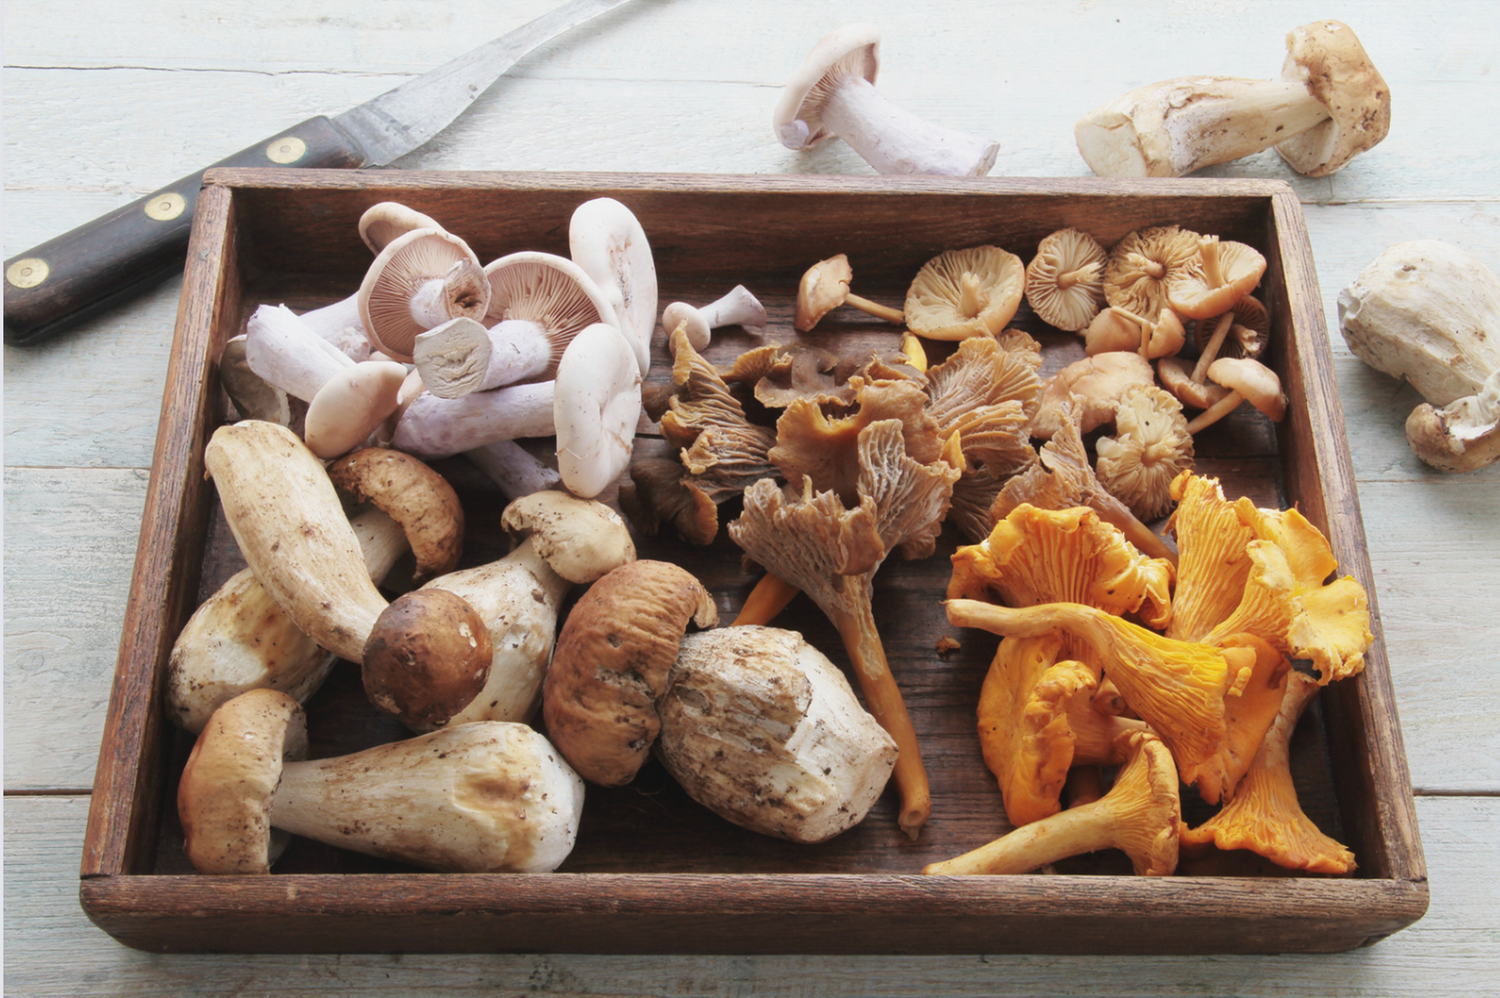 Canine Chewing: Mushroom Safety in Dog Nutrition